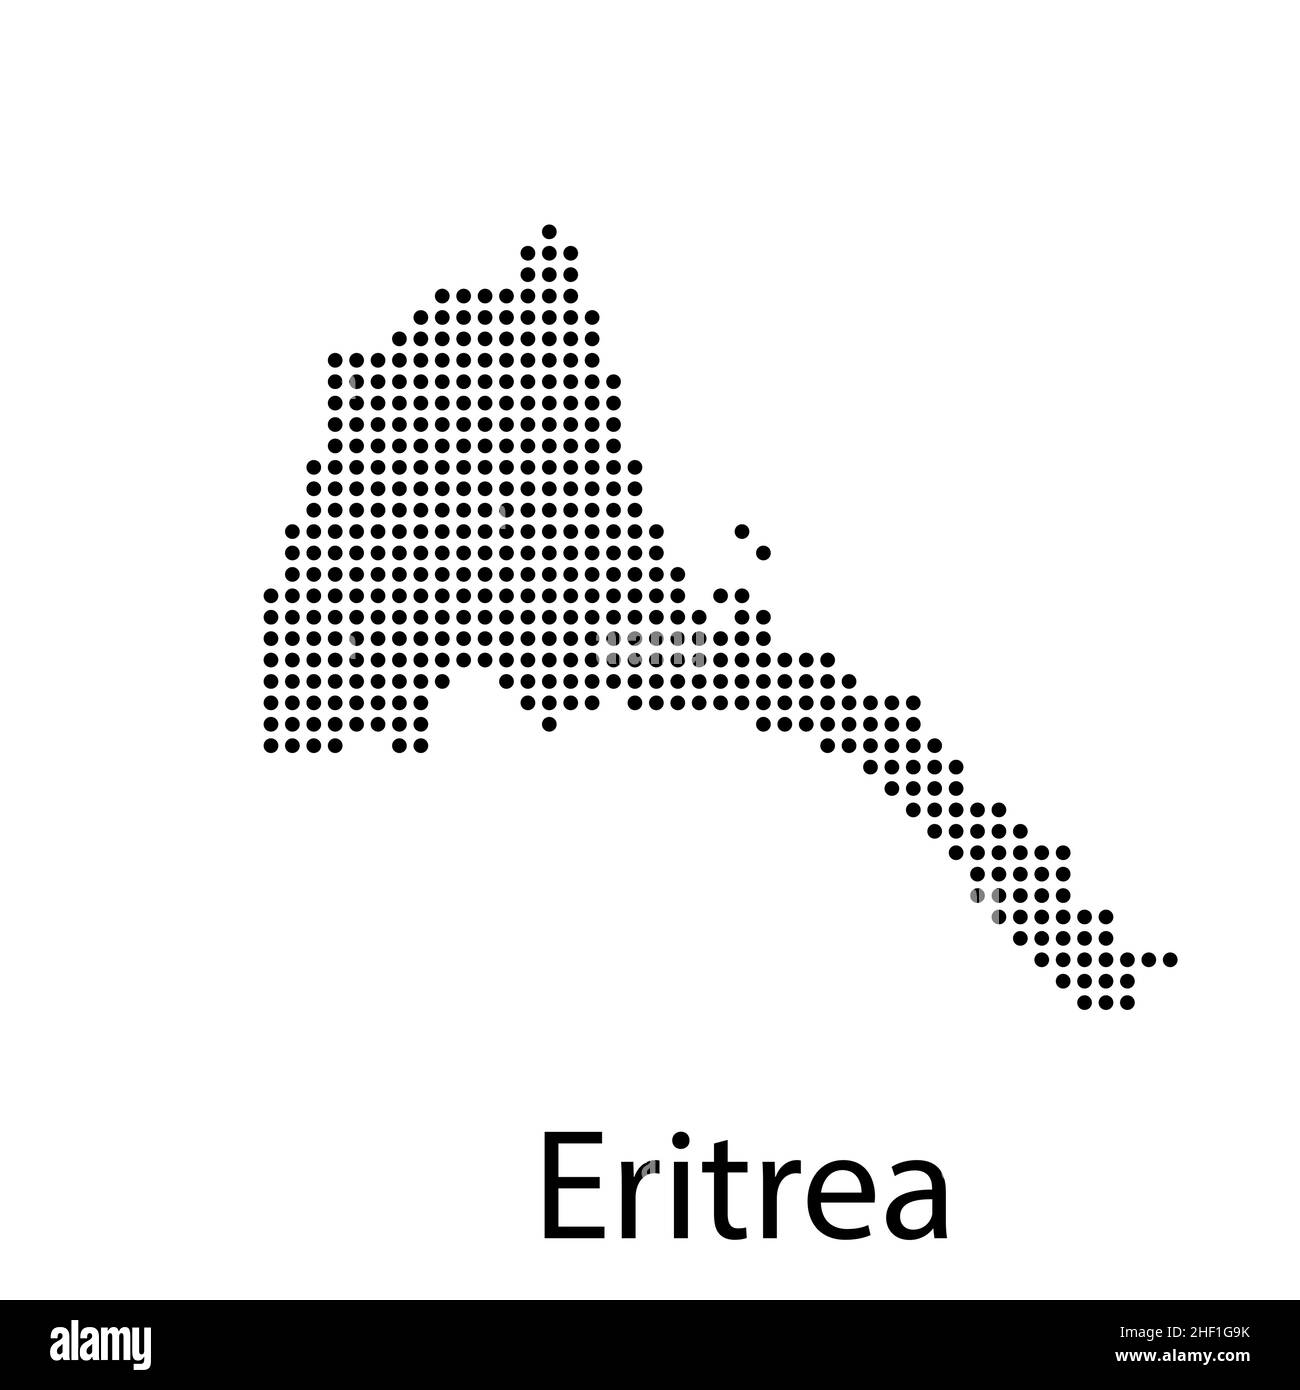 Eritrea vector map silhouette, high detailed illustration isolated on white background. Western Africa country. Eritrea map silhouette. vector illustr Stock Vector